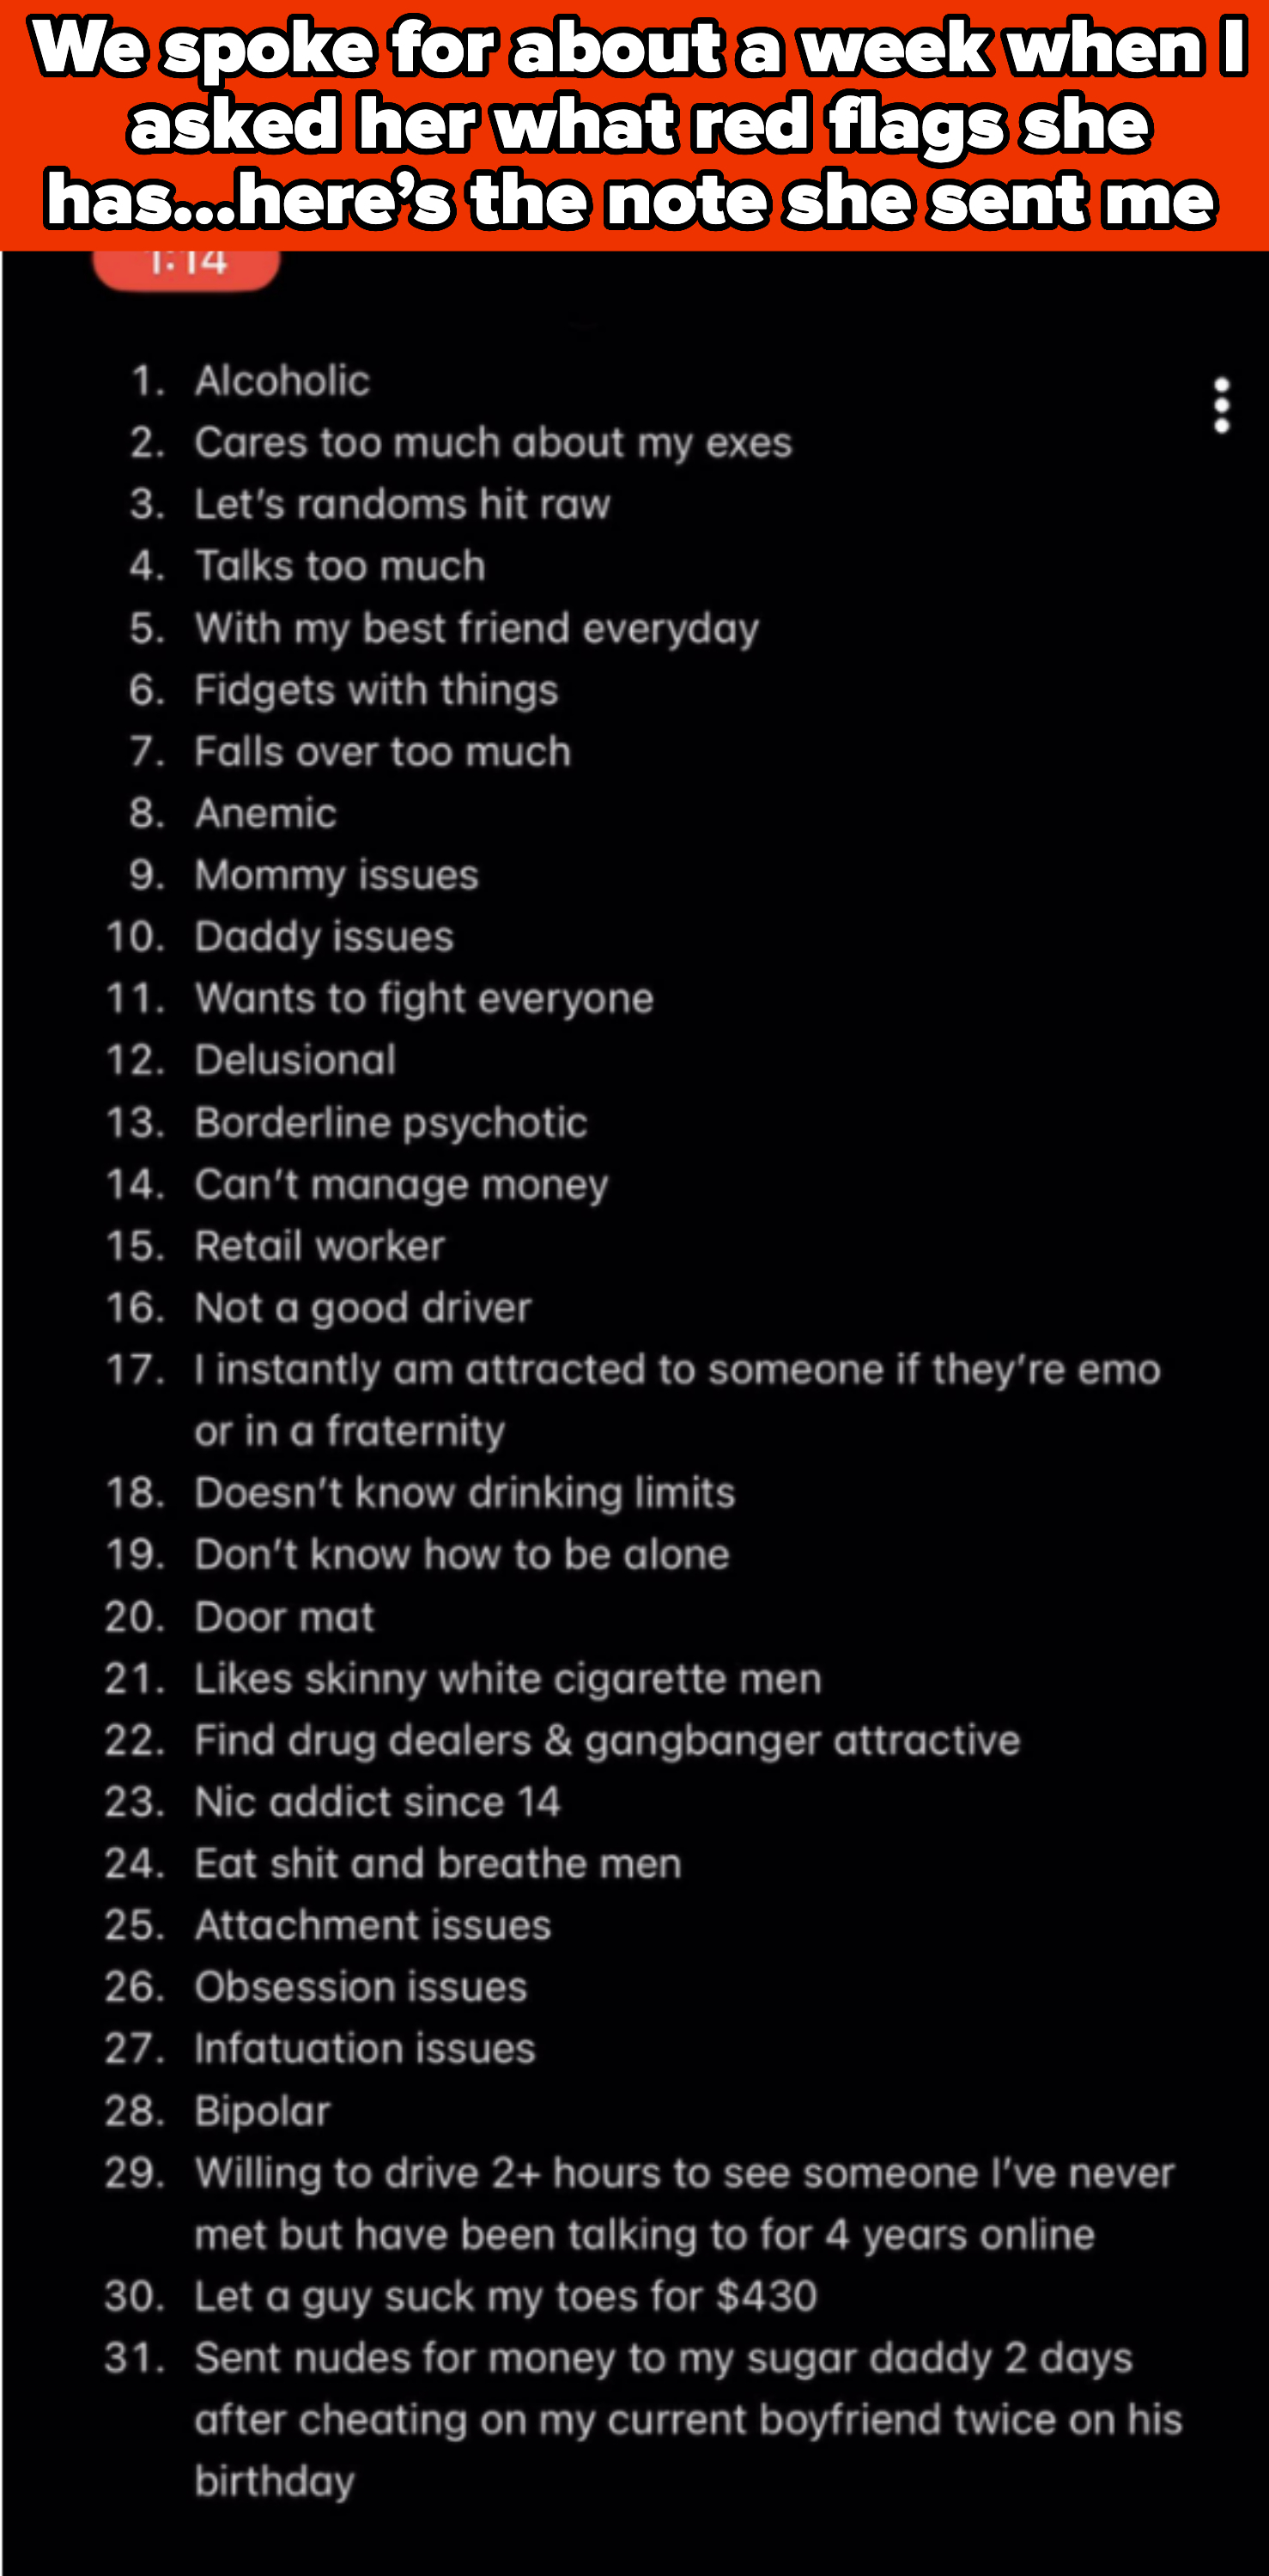 list of red flags including &quot;not a good driver&quot; and &quot;retail worker&quot;